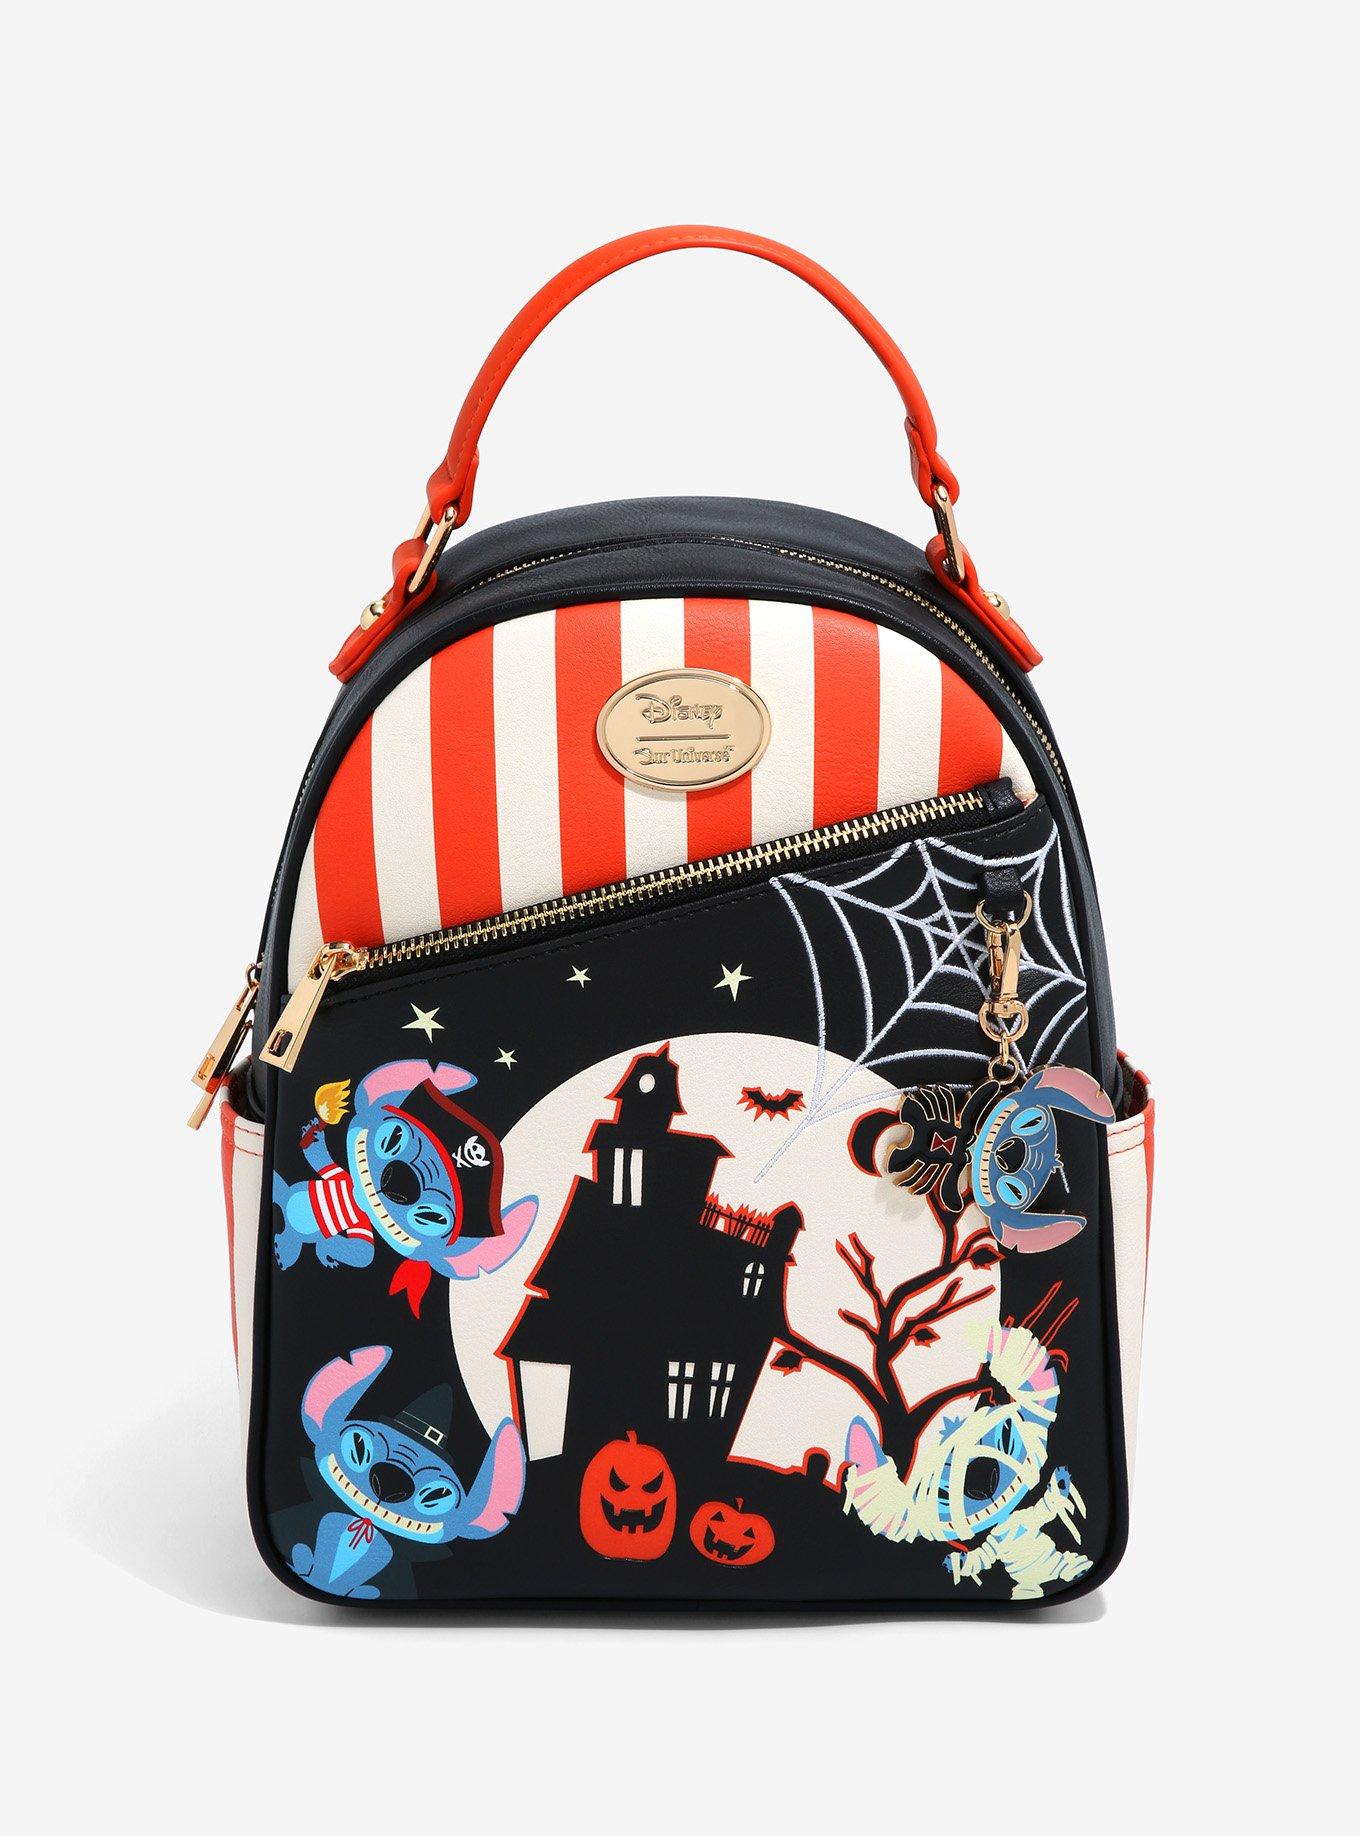 Stitch Halloween Backpack, Lilo Stitch Backpack, Cute School Bags ...